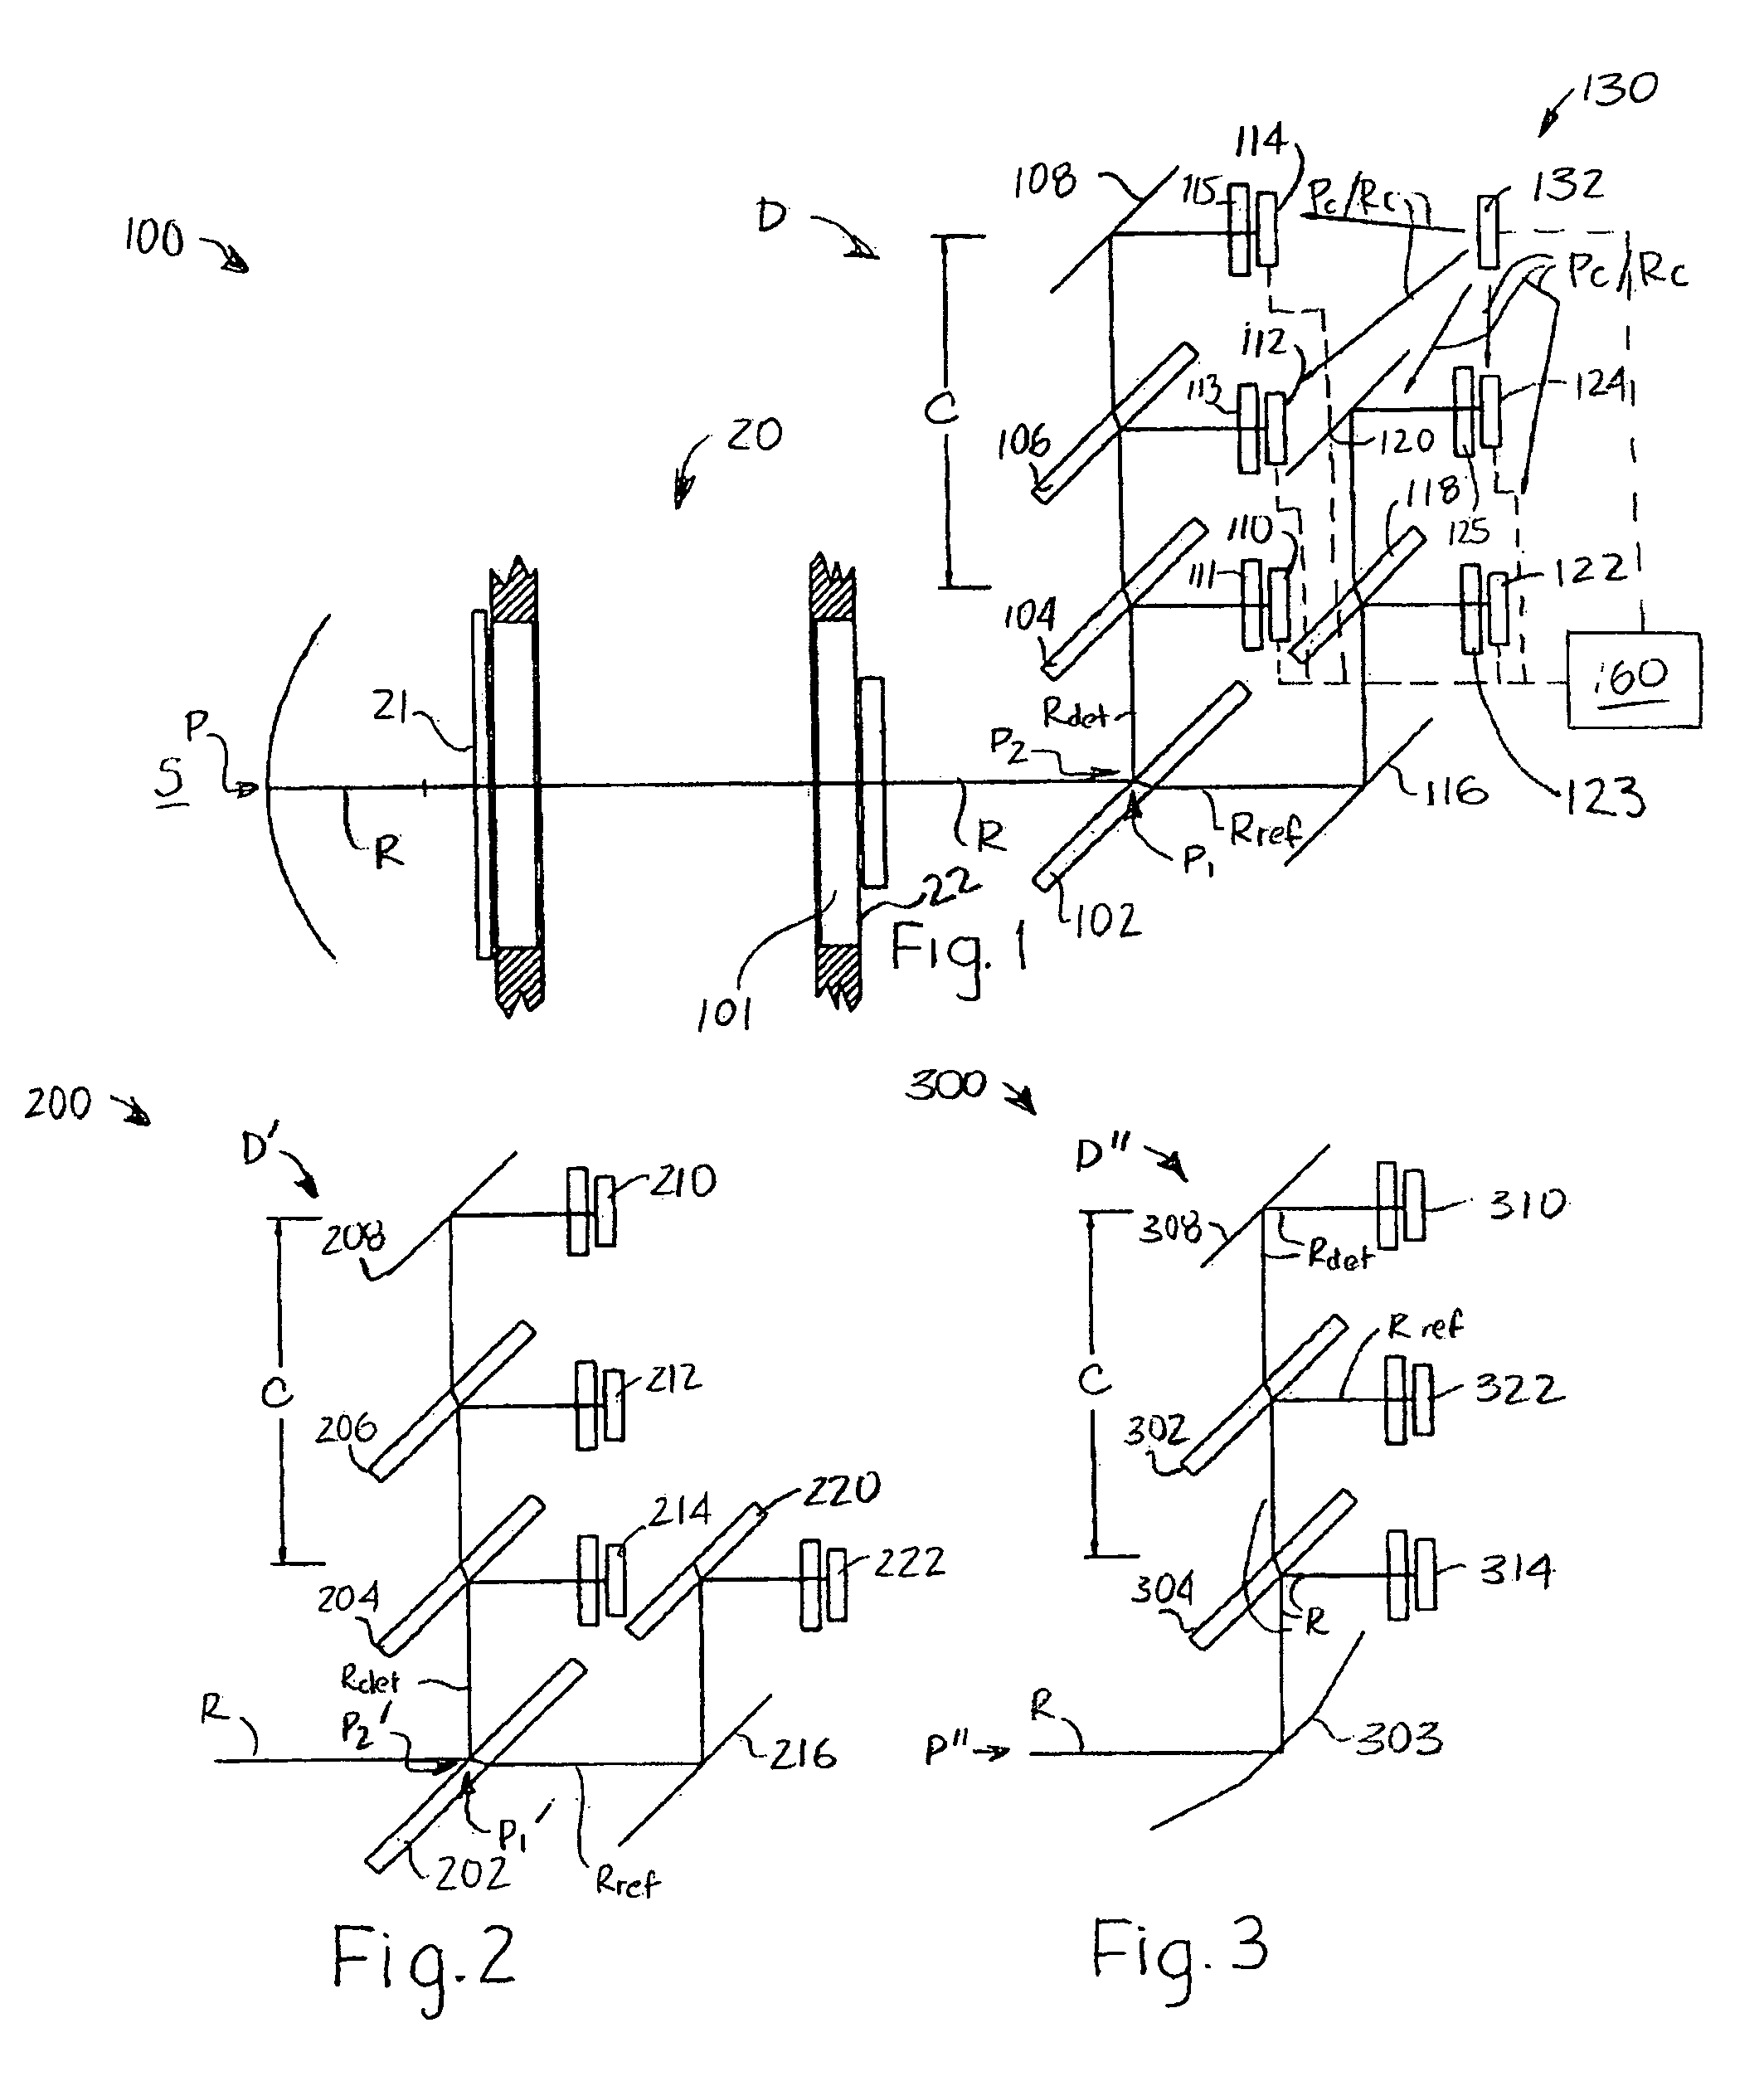 Ambient gas compensation in an optical system